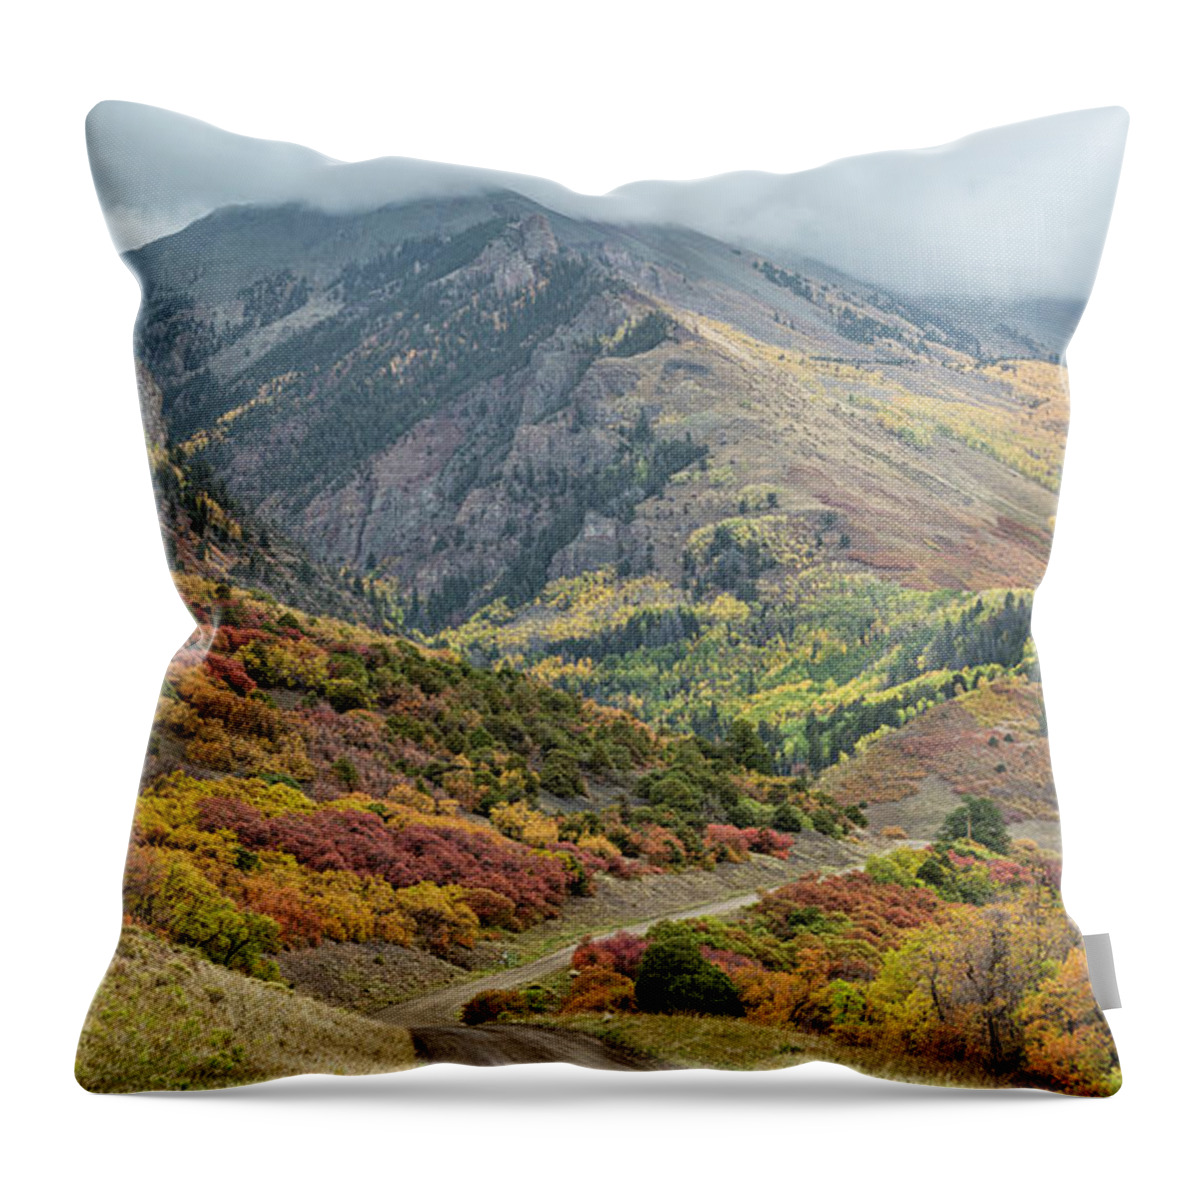 Colorado Throw Pillow featuring the photograph Colorful Autumn Oak Brush by Denise Bush